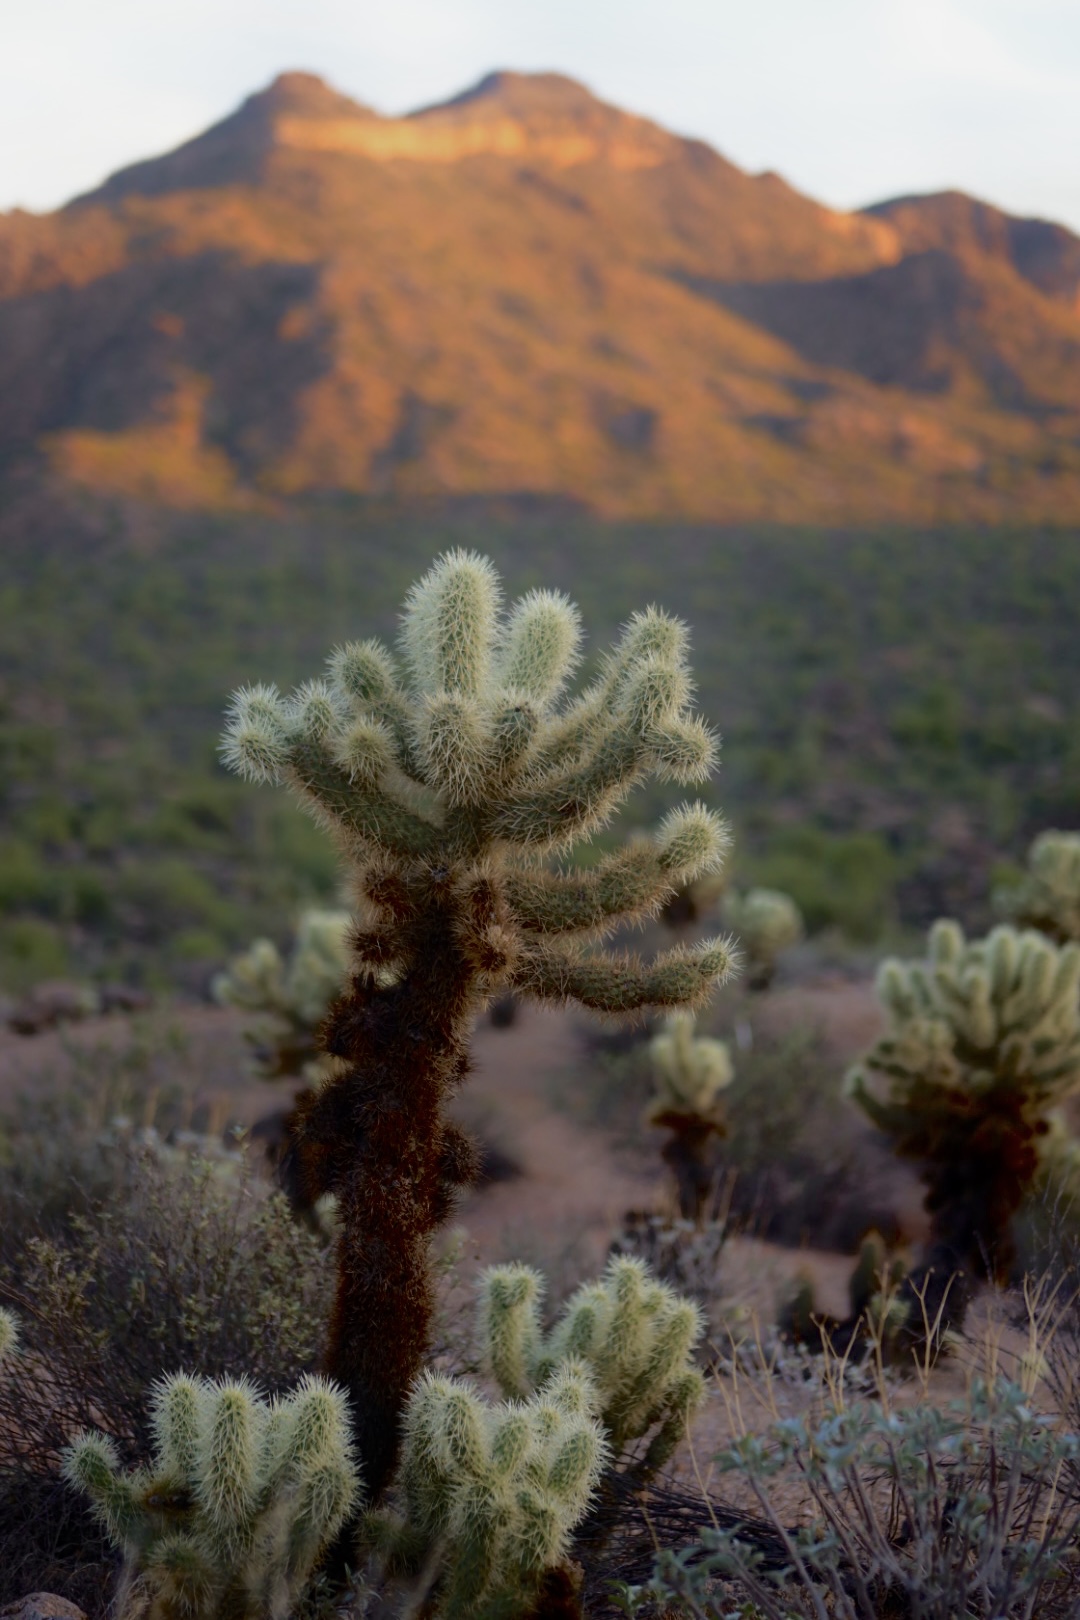 Cholla Cactus with a Tall Mountain in the Background